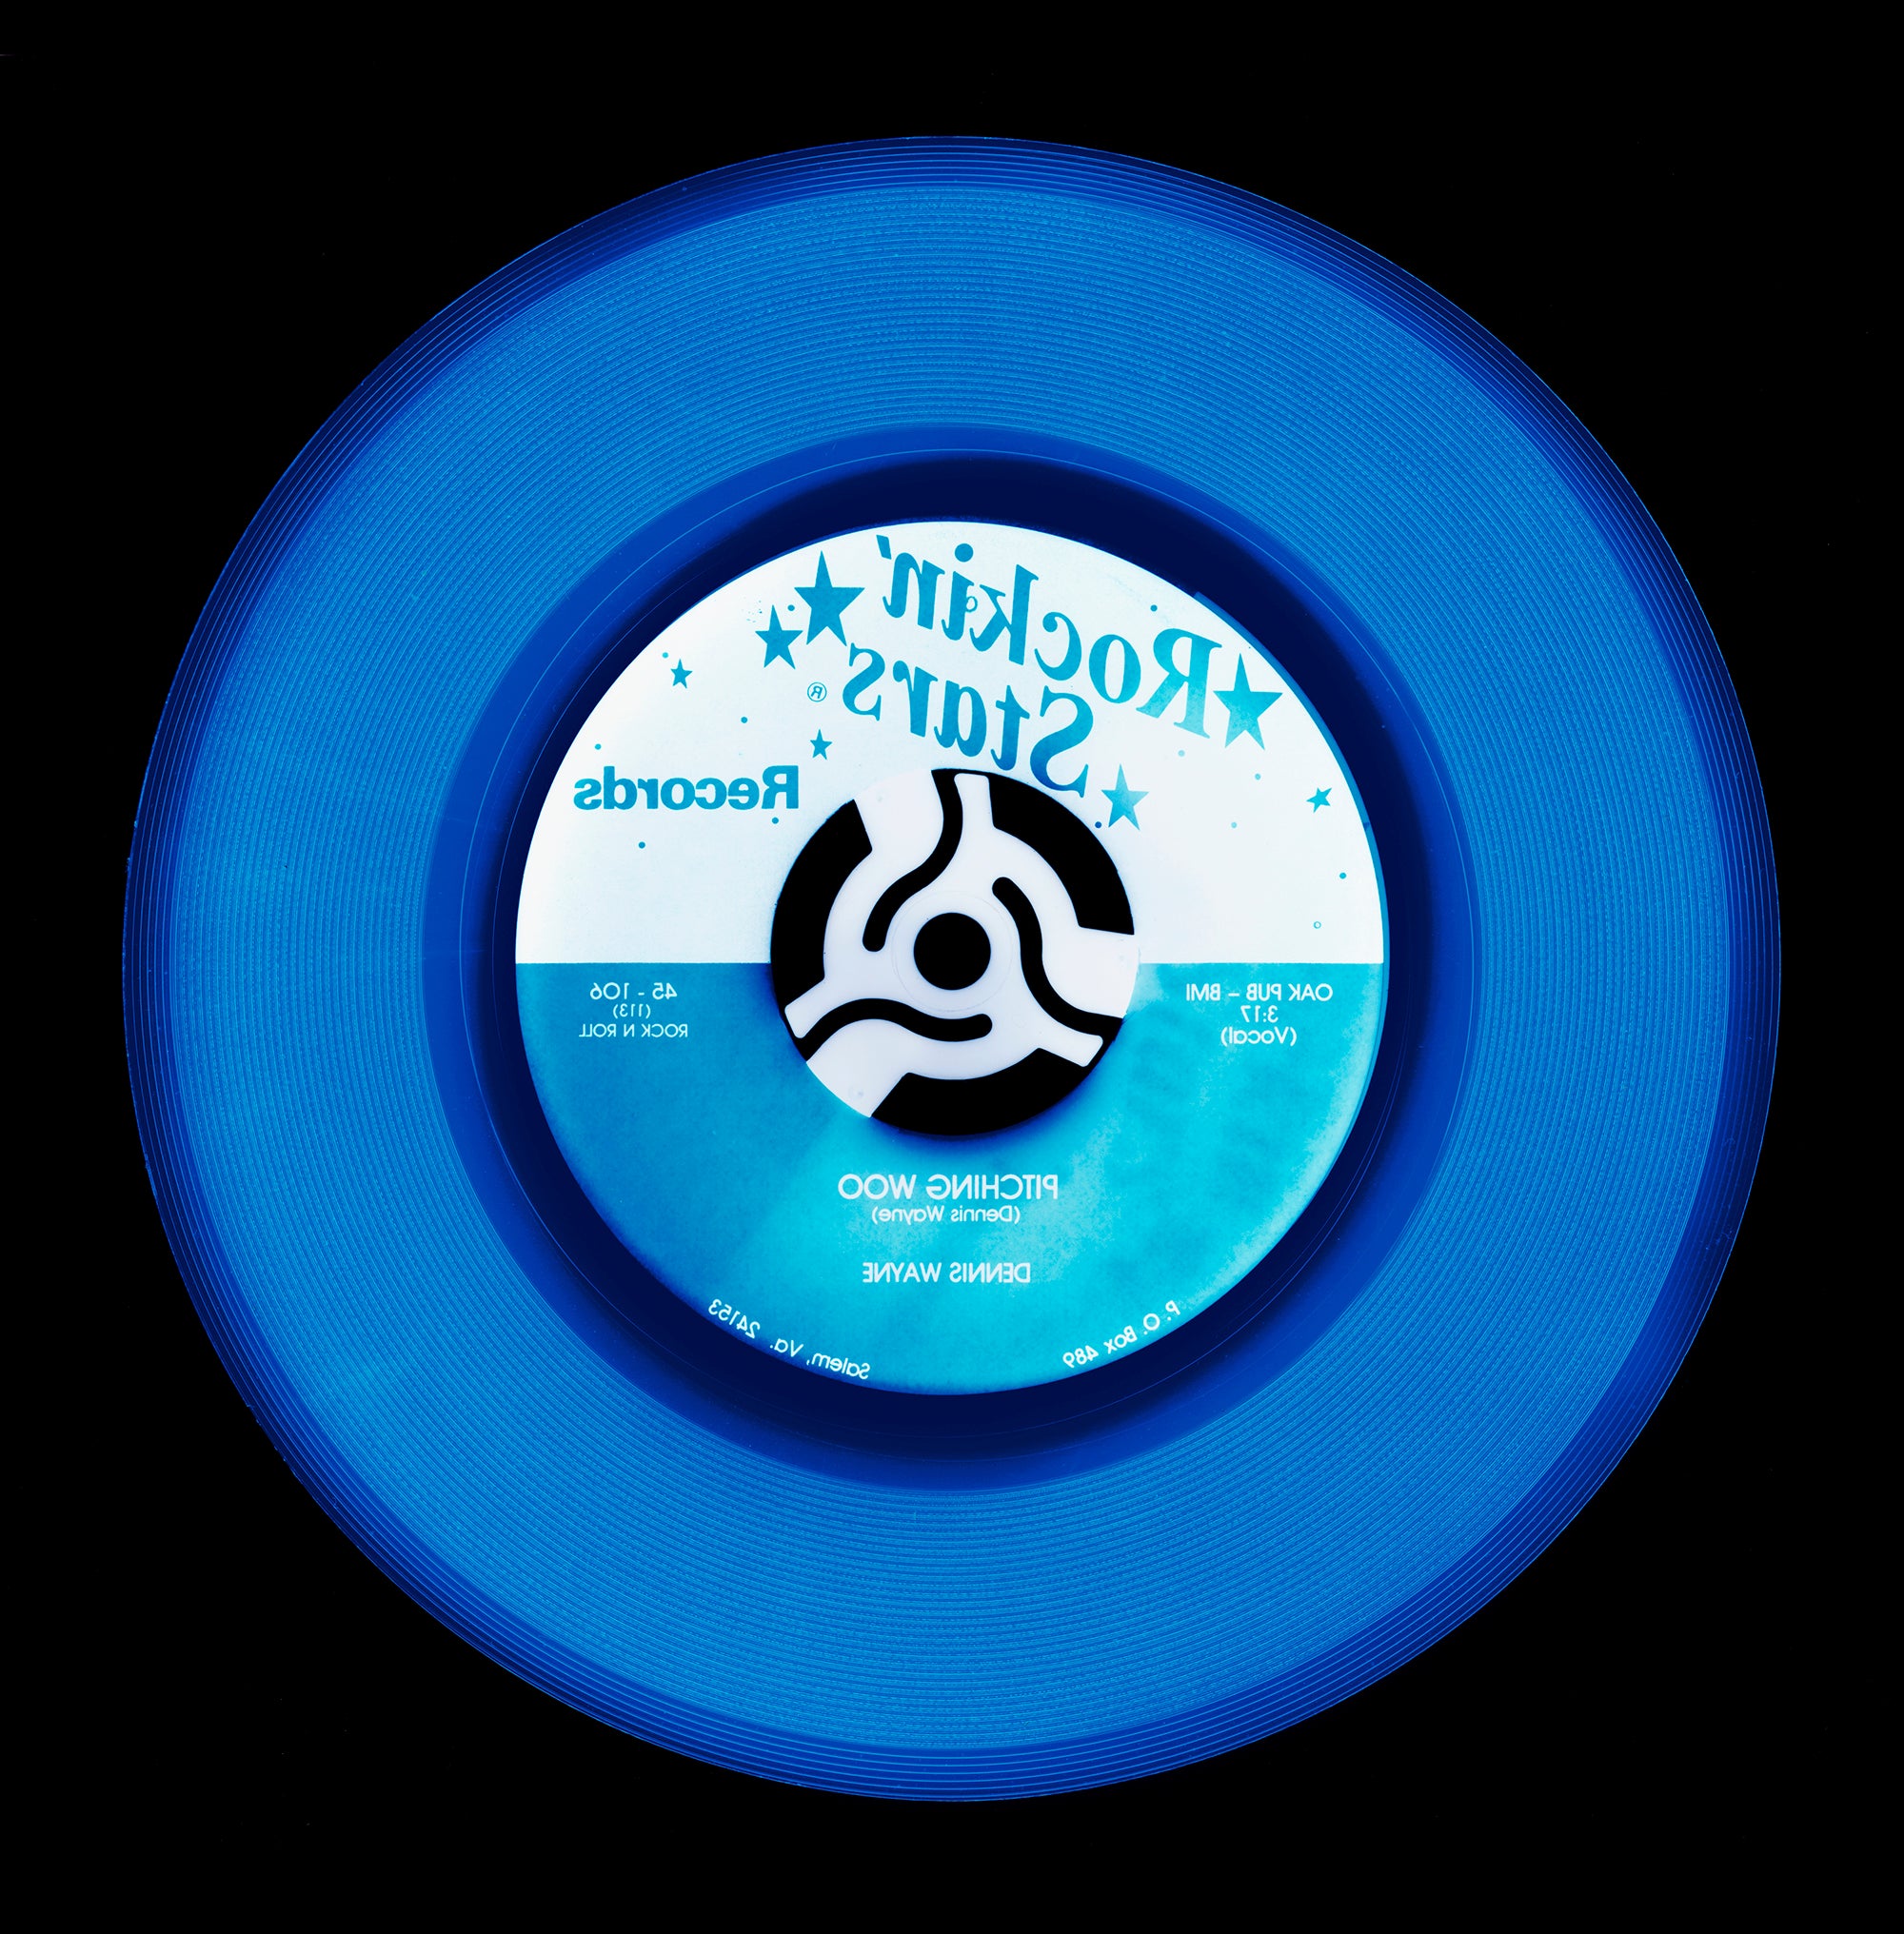 Photograph by Natasha Heidler and Richard Heeps.  A denim blue record with darker blue grooves and the record label is half white, half blue with writing in the opposite blue and white.  This vinyl sits on a black background.